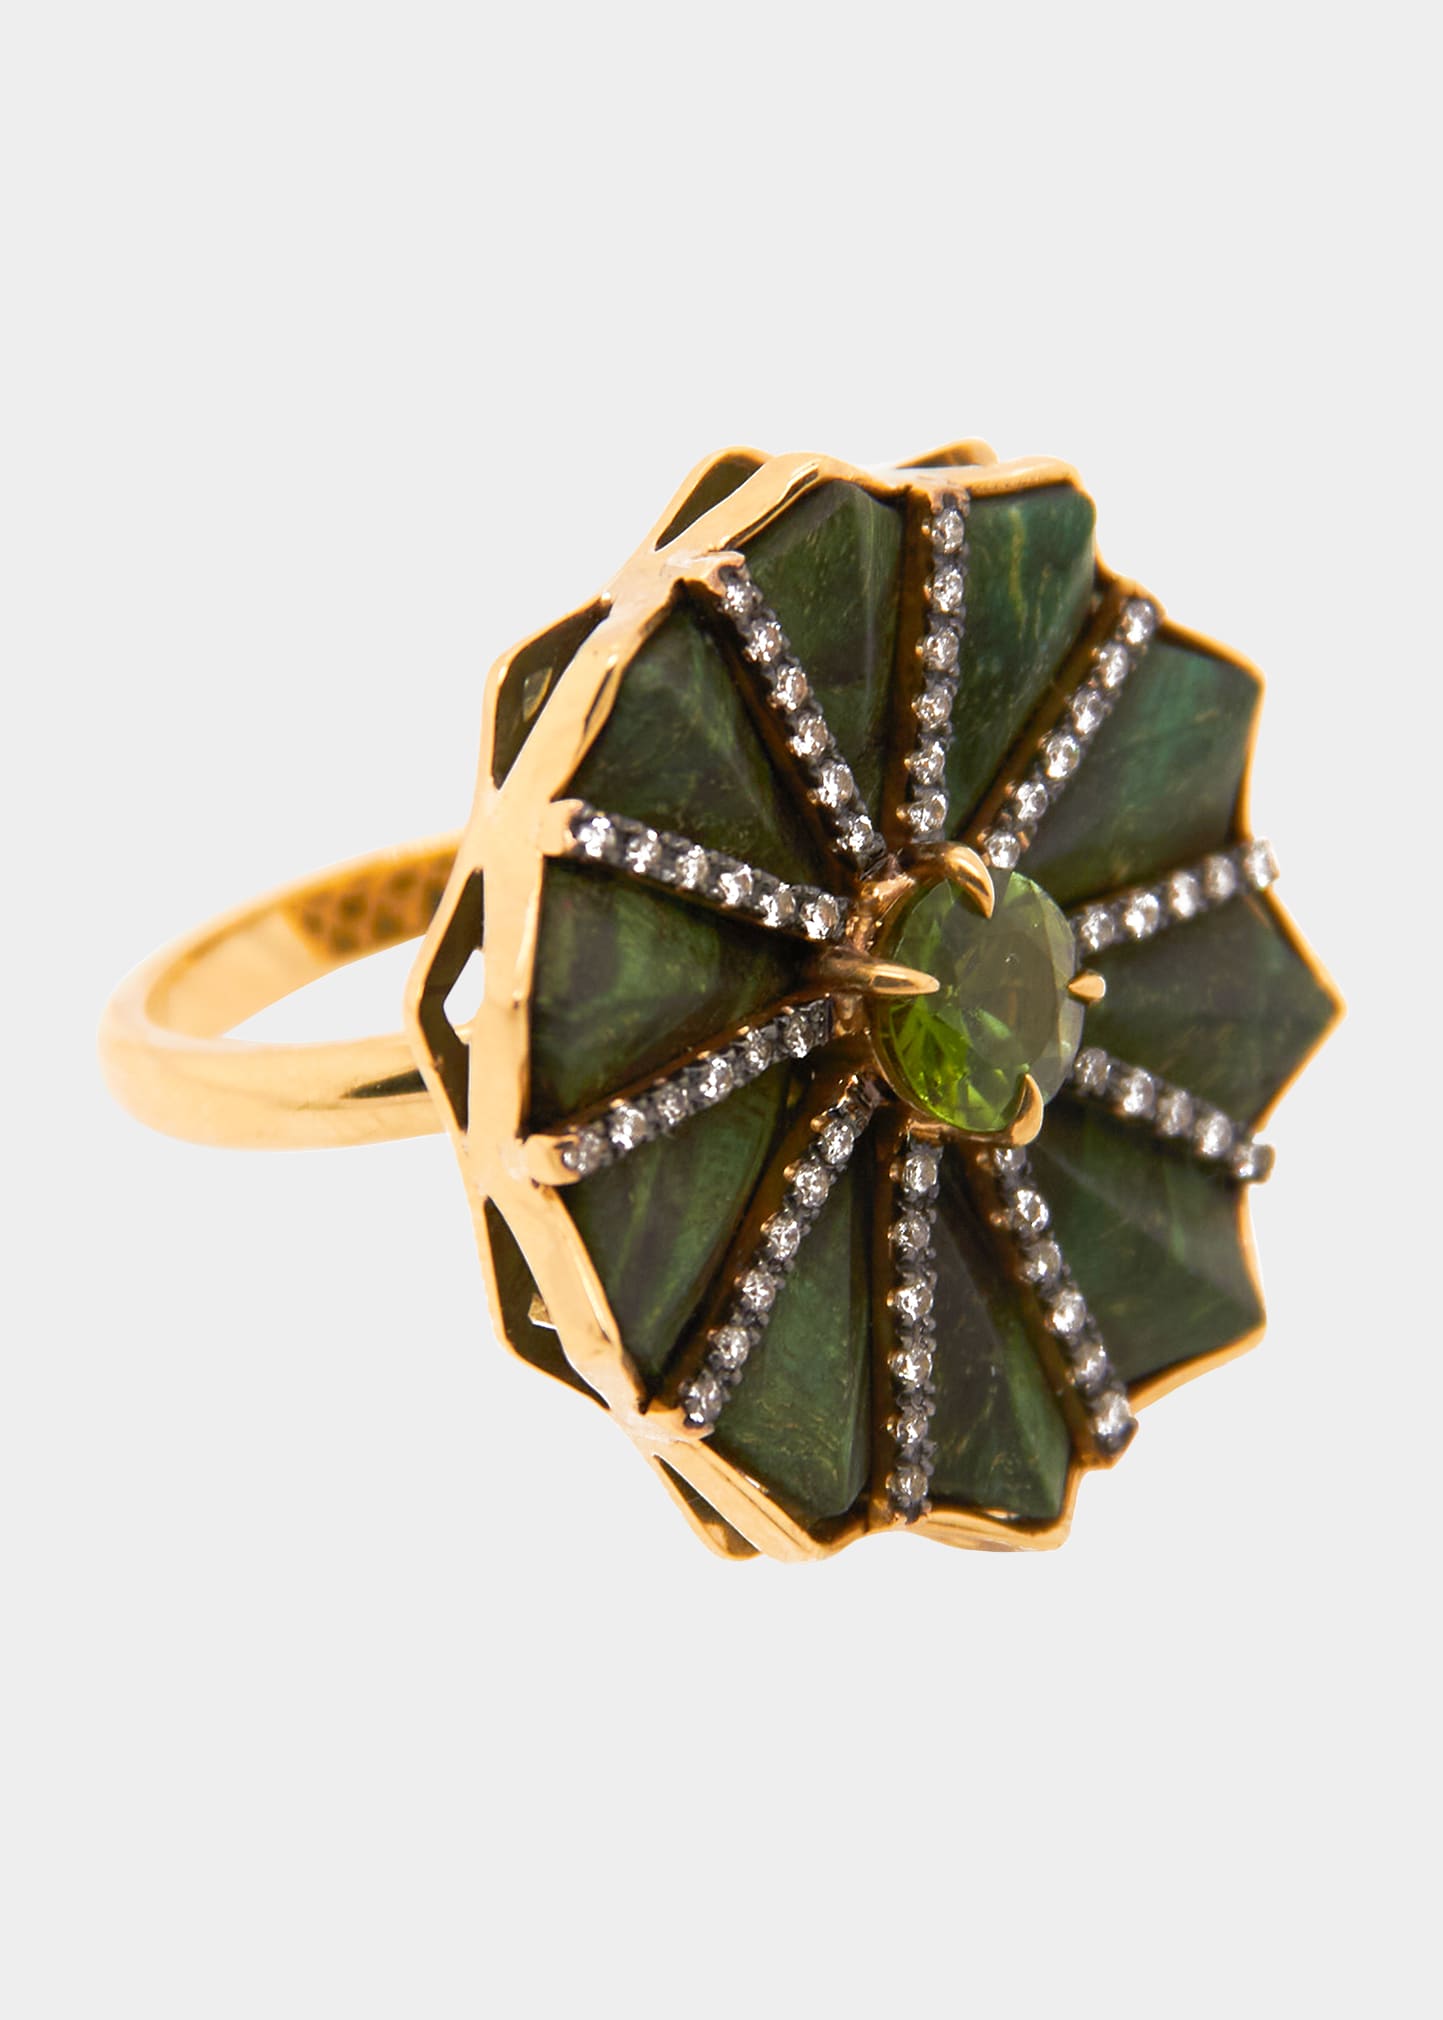 Carved Wood Ring with Diamonds and Green Tourmaline